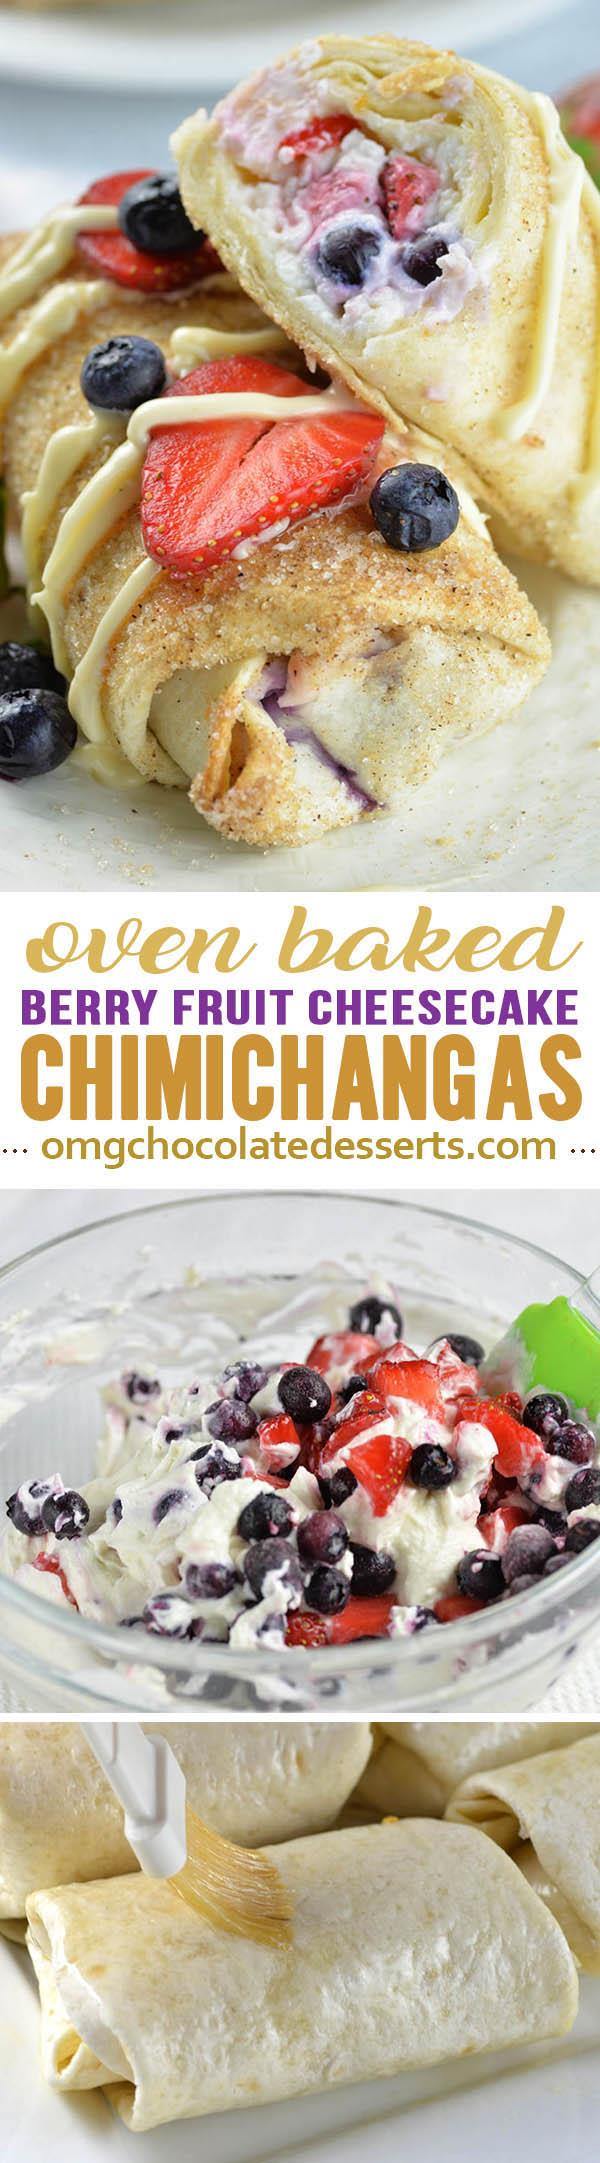 Looking for QUICK and EASY SUMMER DESSERT RECIPE?! Oven Baked Berry Cheesecake Chimichangas are delicious, EASY and FUN DESSERT, perfect as red, white and blue 4th OF JULY PARTY FOOD!!!